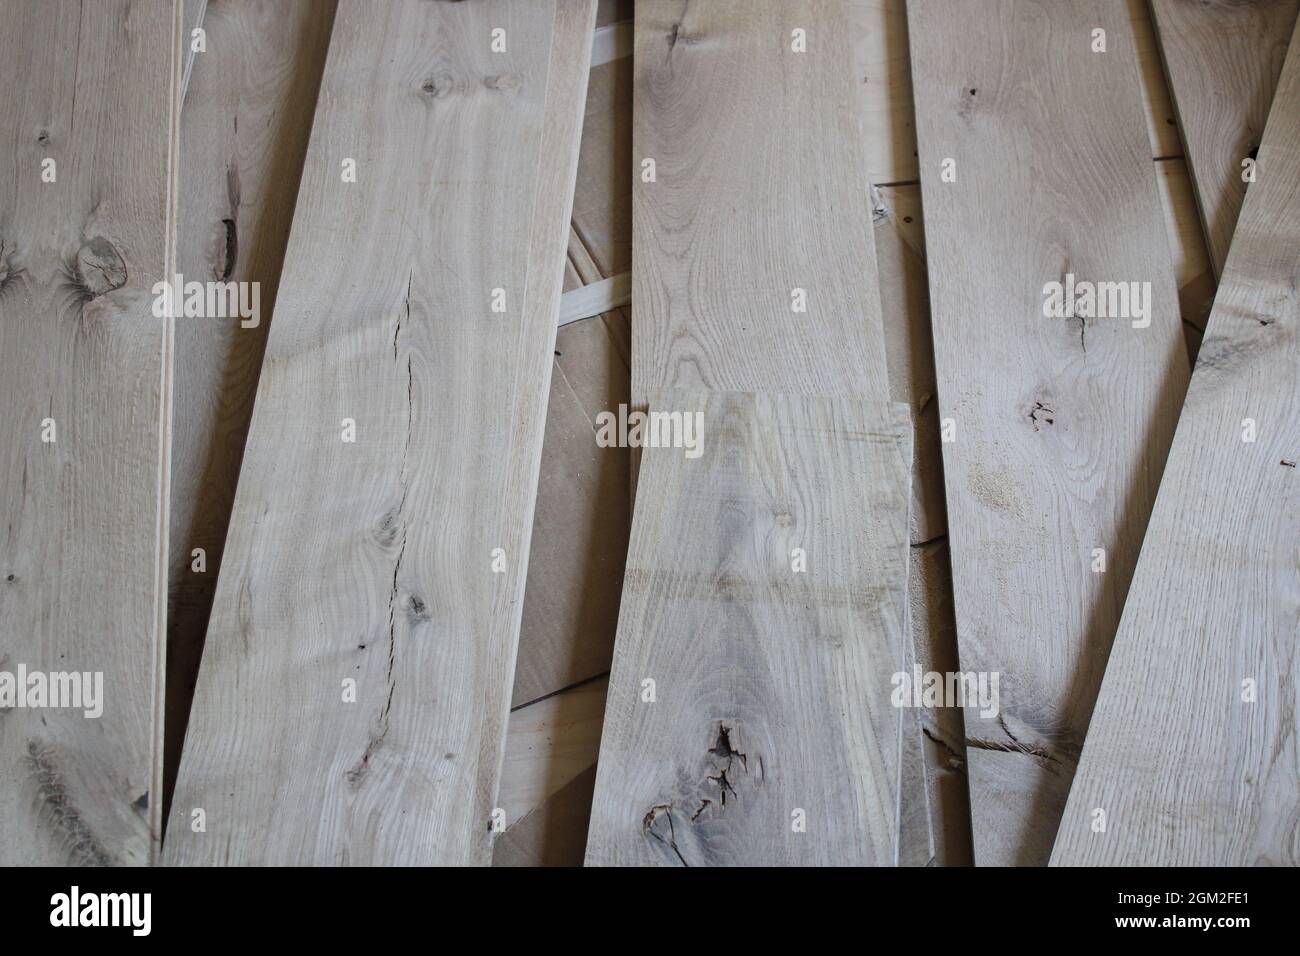 Loosely Laid Out White Oak Flooring Planks Stock Photo